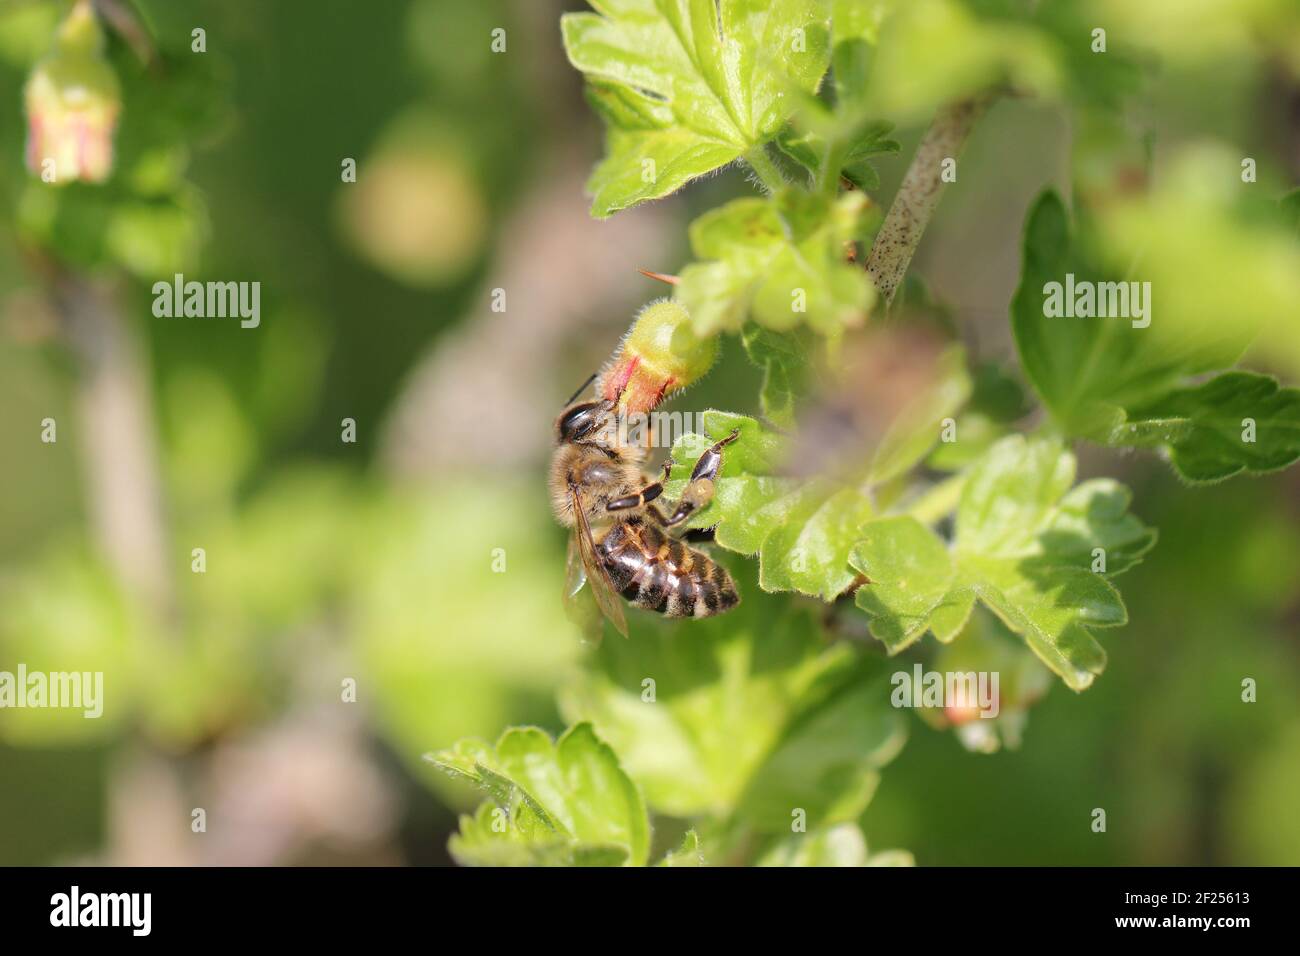 Bee on a Leaf collecting Nectar Stock Photo